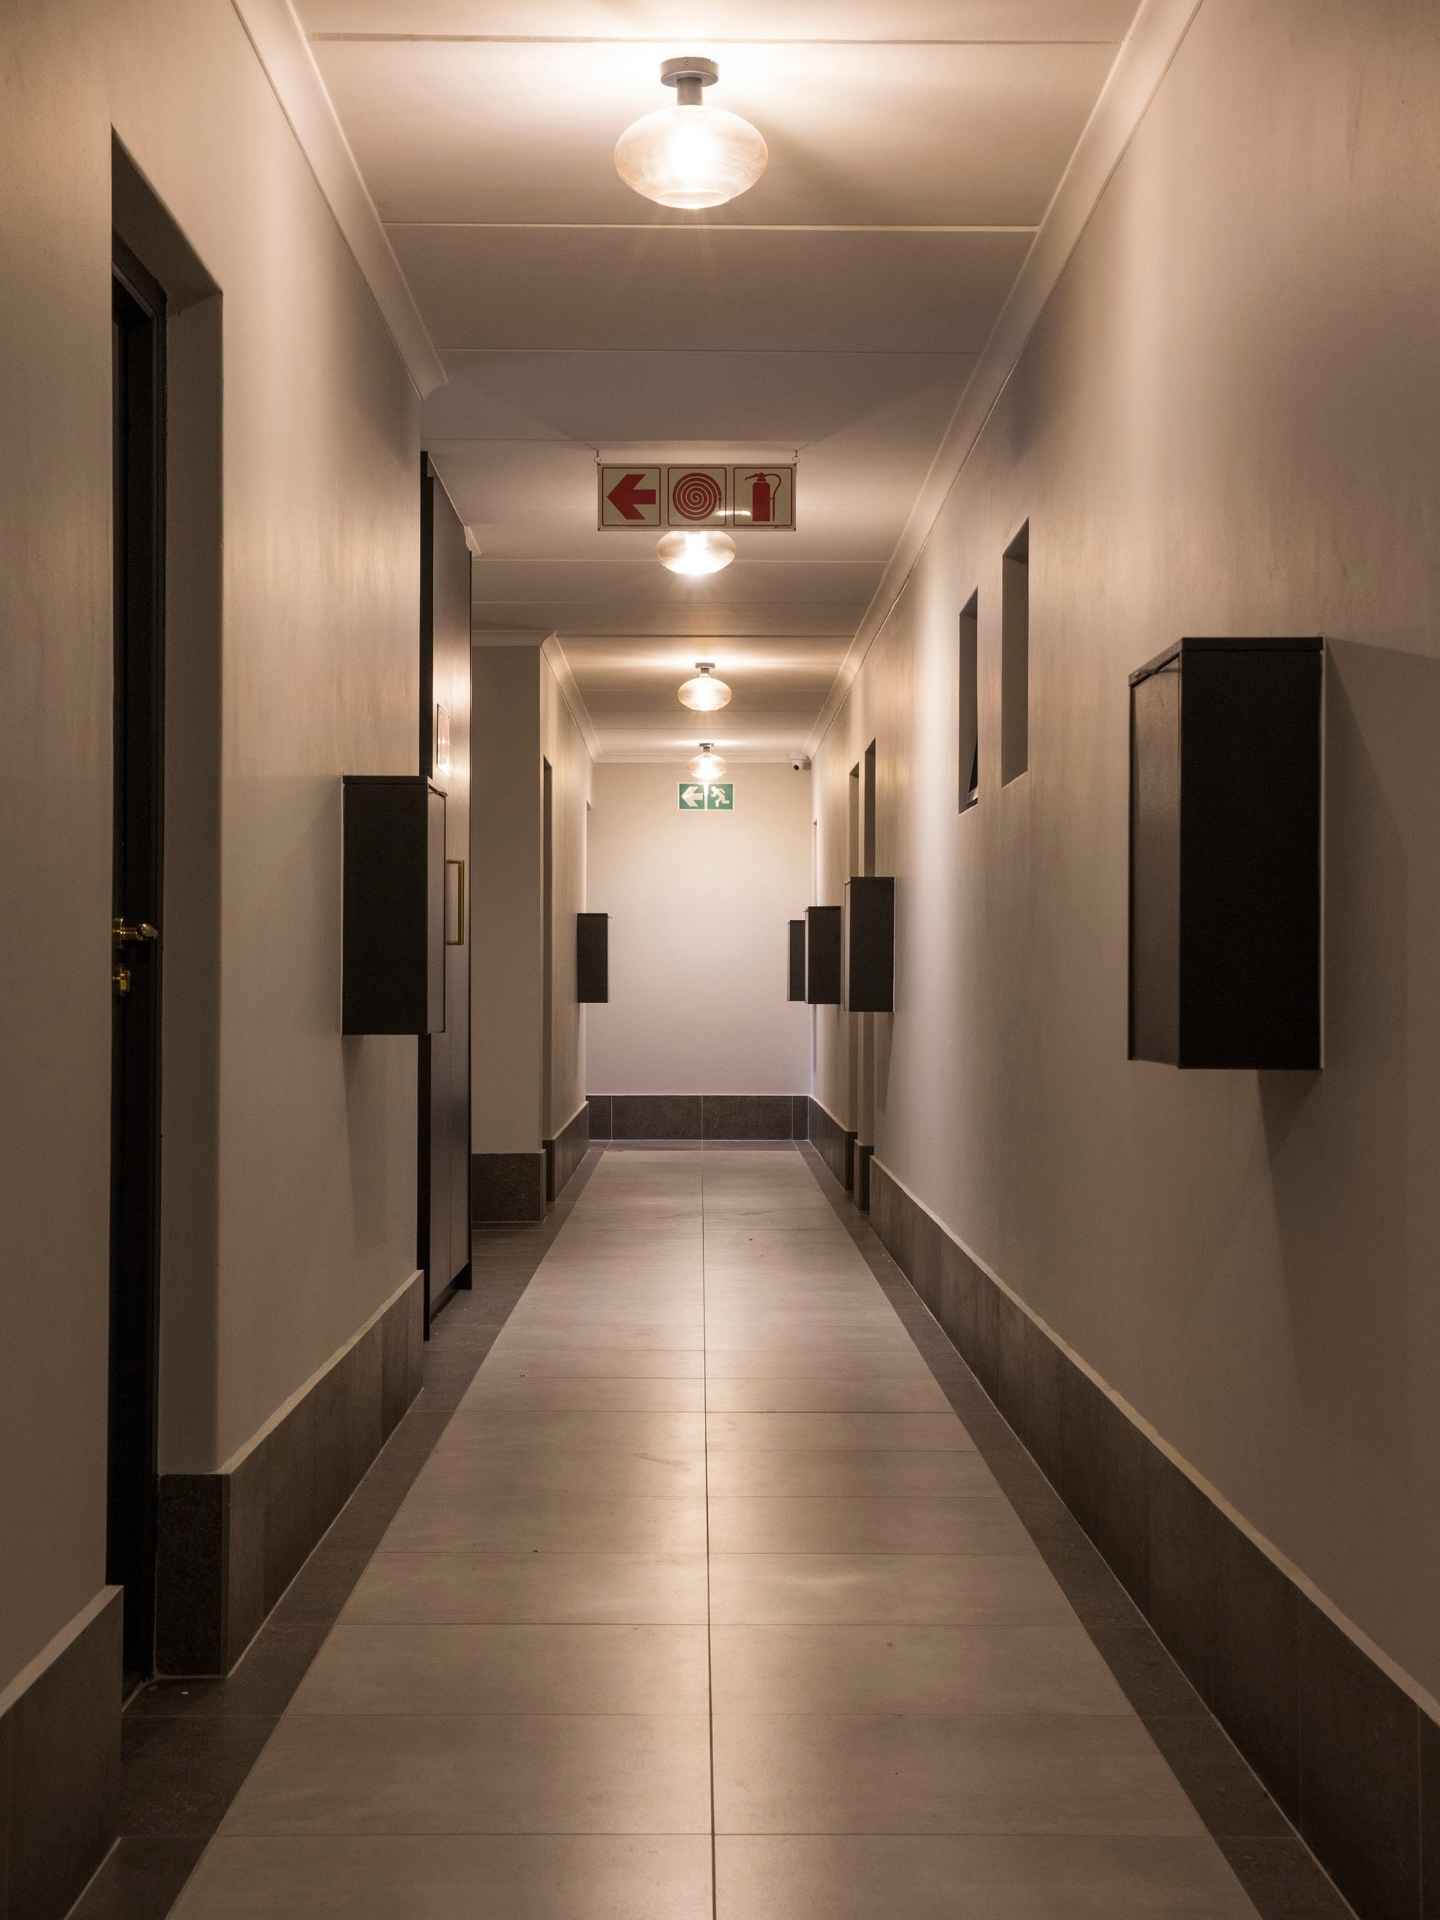 Hotel looking passages with mailboxes